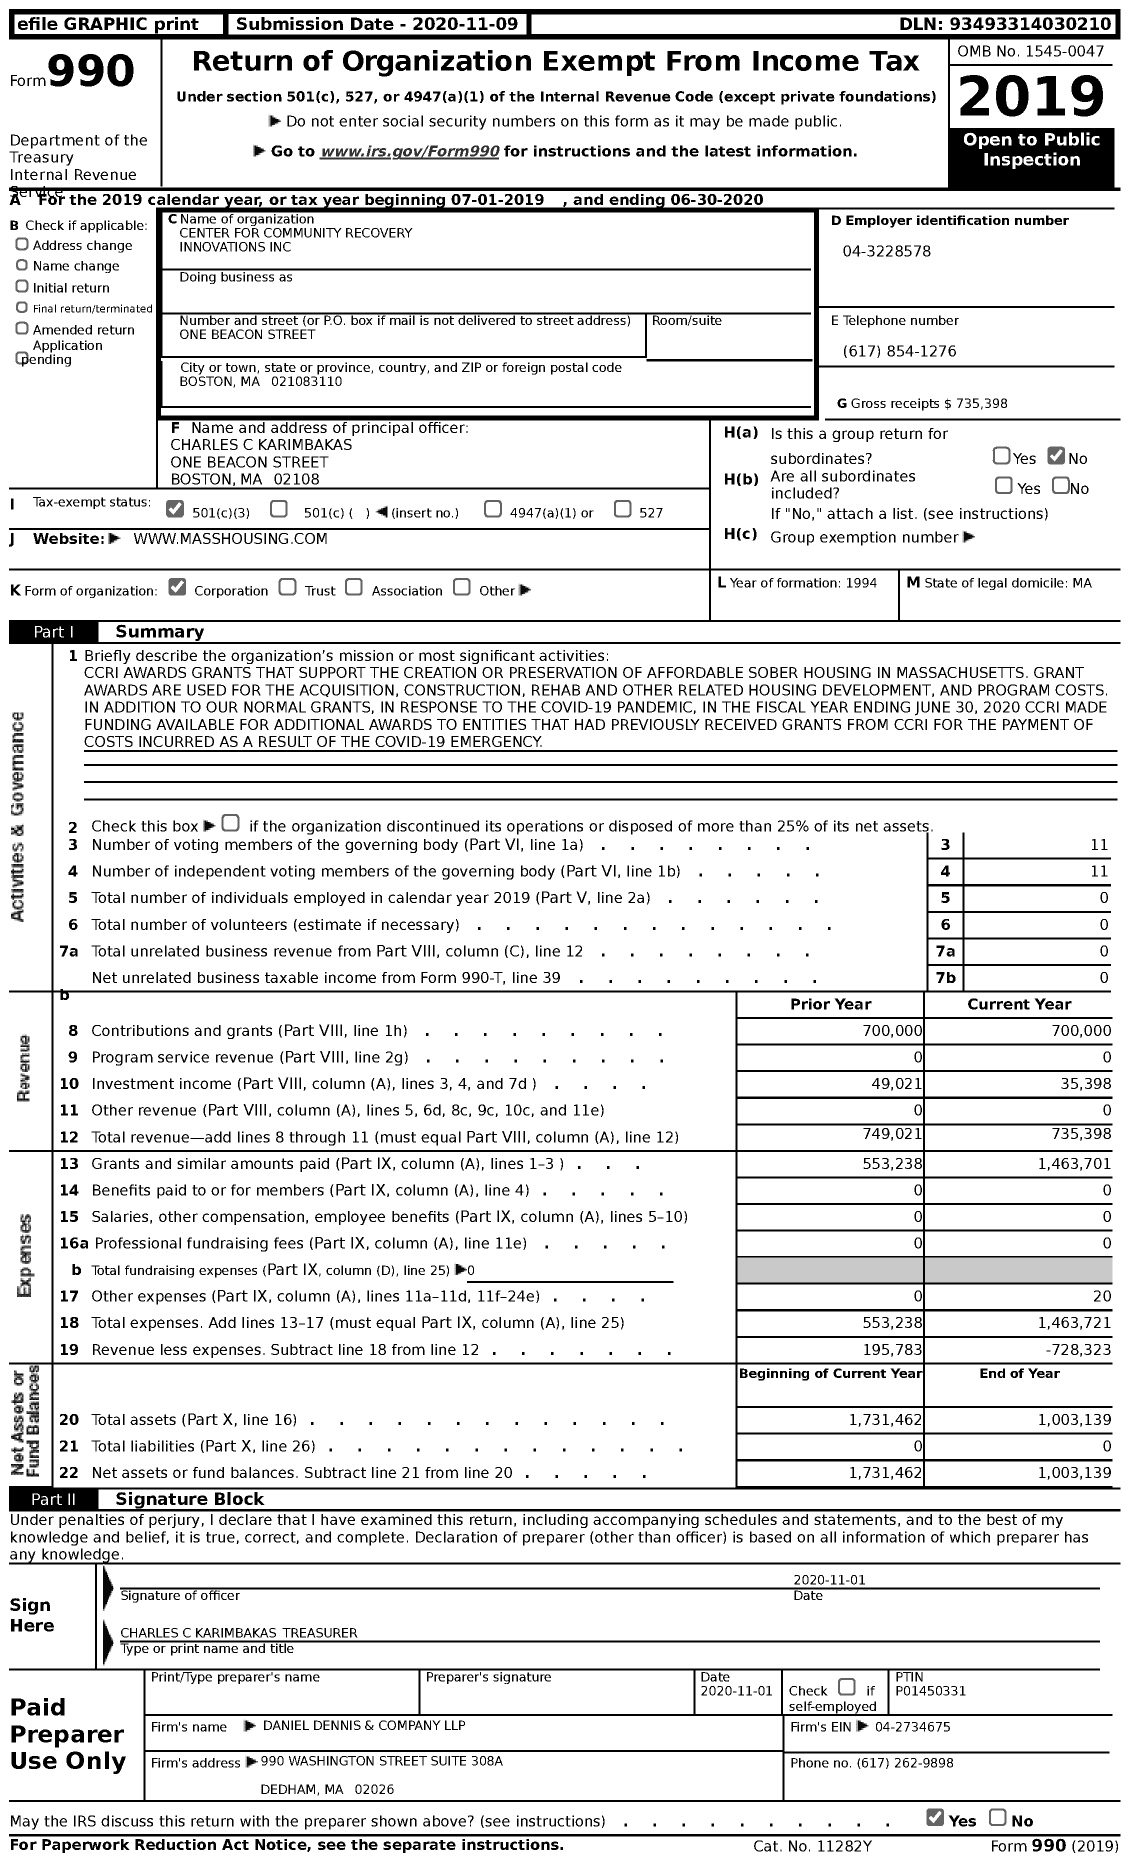 Image of first page of 2019 Form 990 for Center for Community Recovery Innovations